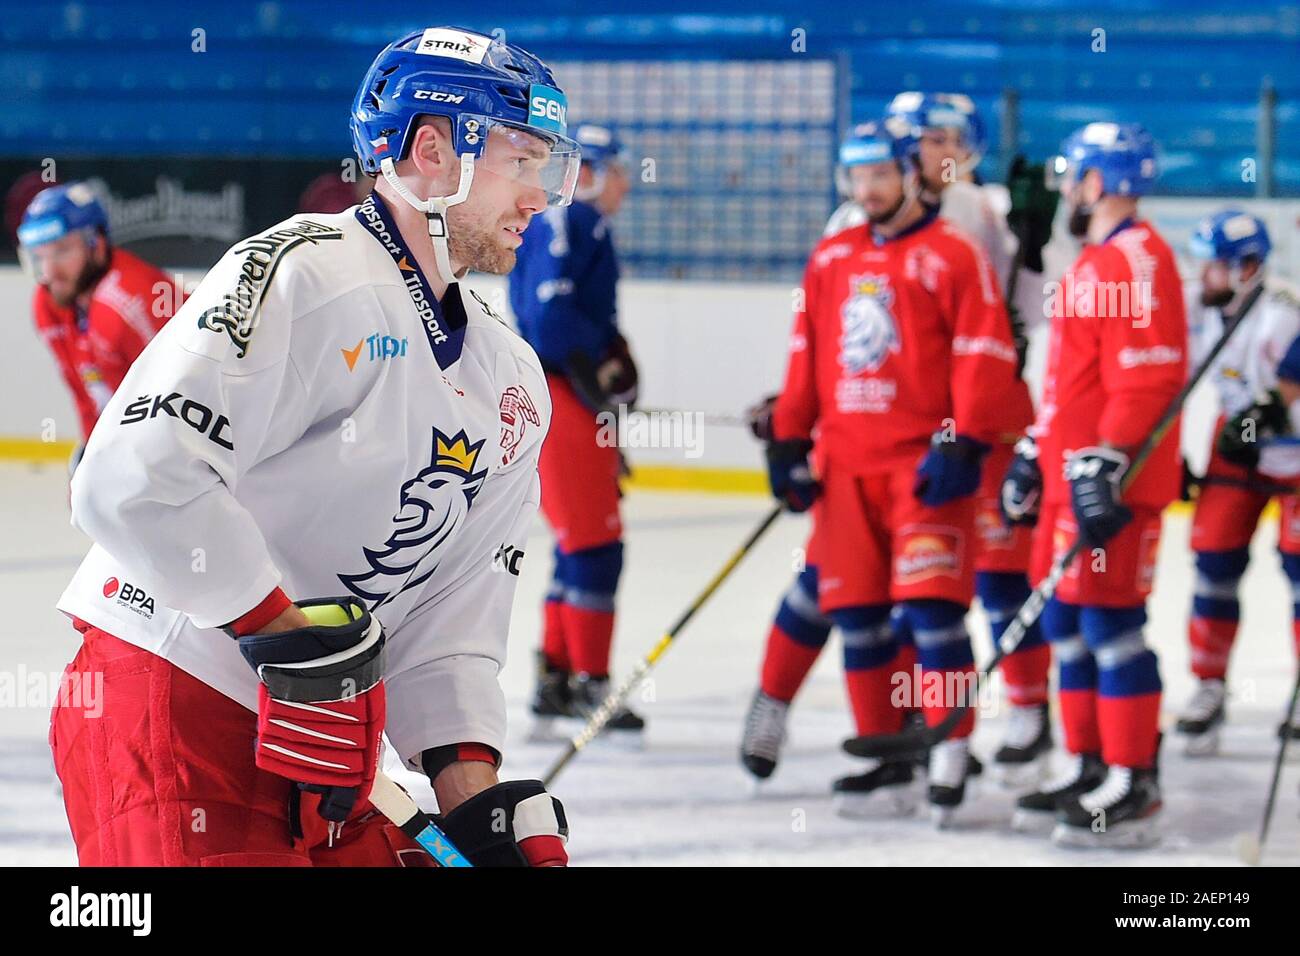 Finland Ice Hockey High Resolution Stock Photography and Images - Alamy